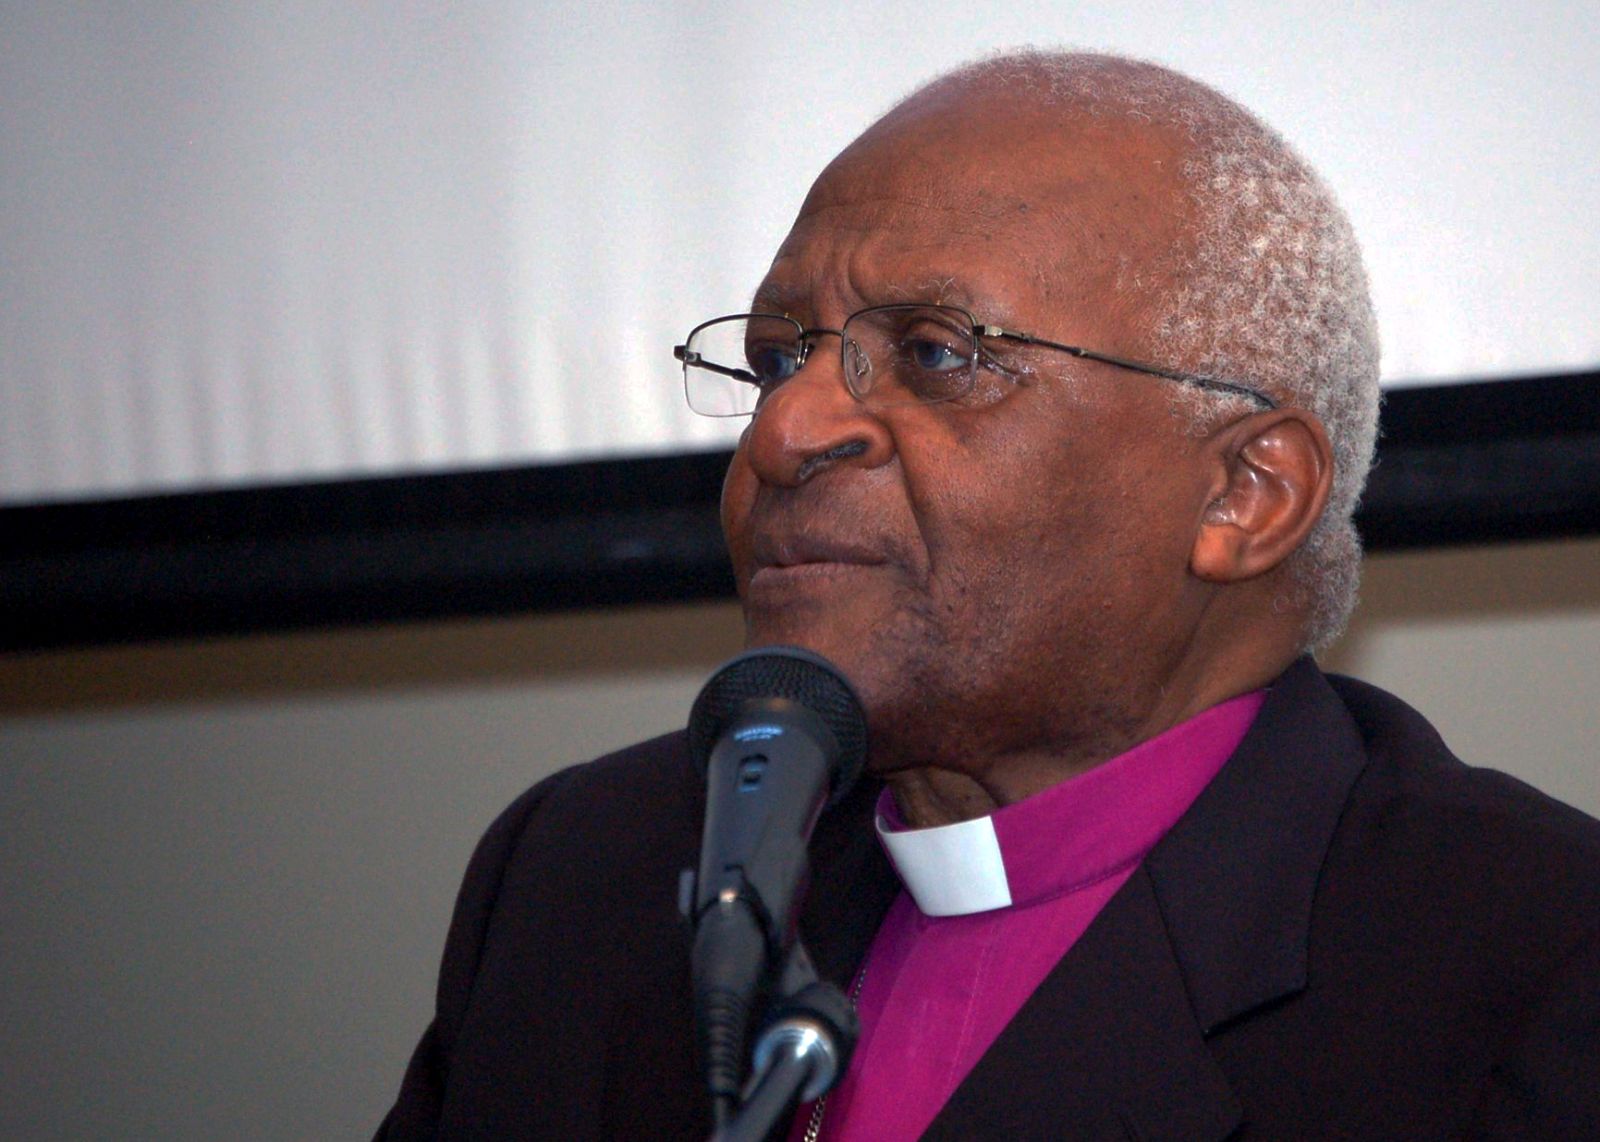 091207-N-0000S-001
BOTSWANA, Africa (Dec. 7, 2009) South African Anglican Archbishop Desmond Tutu delivered a speech at the first International Ethics Conference at the University of Botswana. (U.S. Navy photo by Cmdr. J.A. Surette/Released)